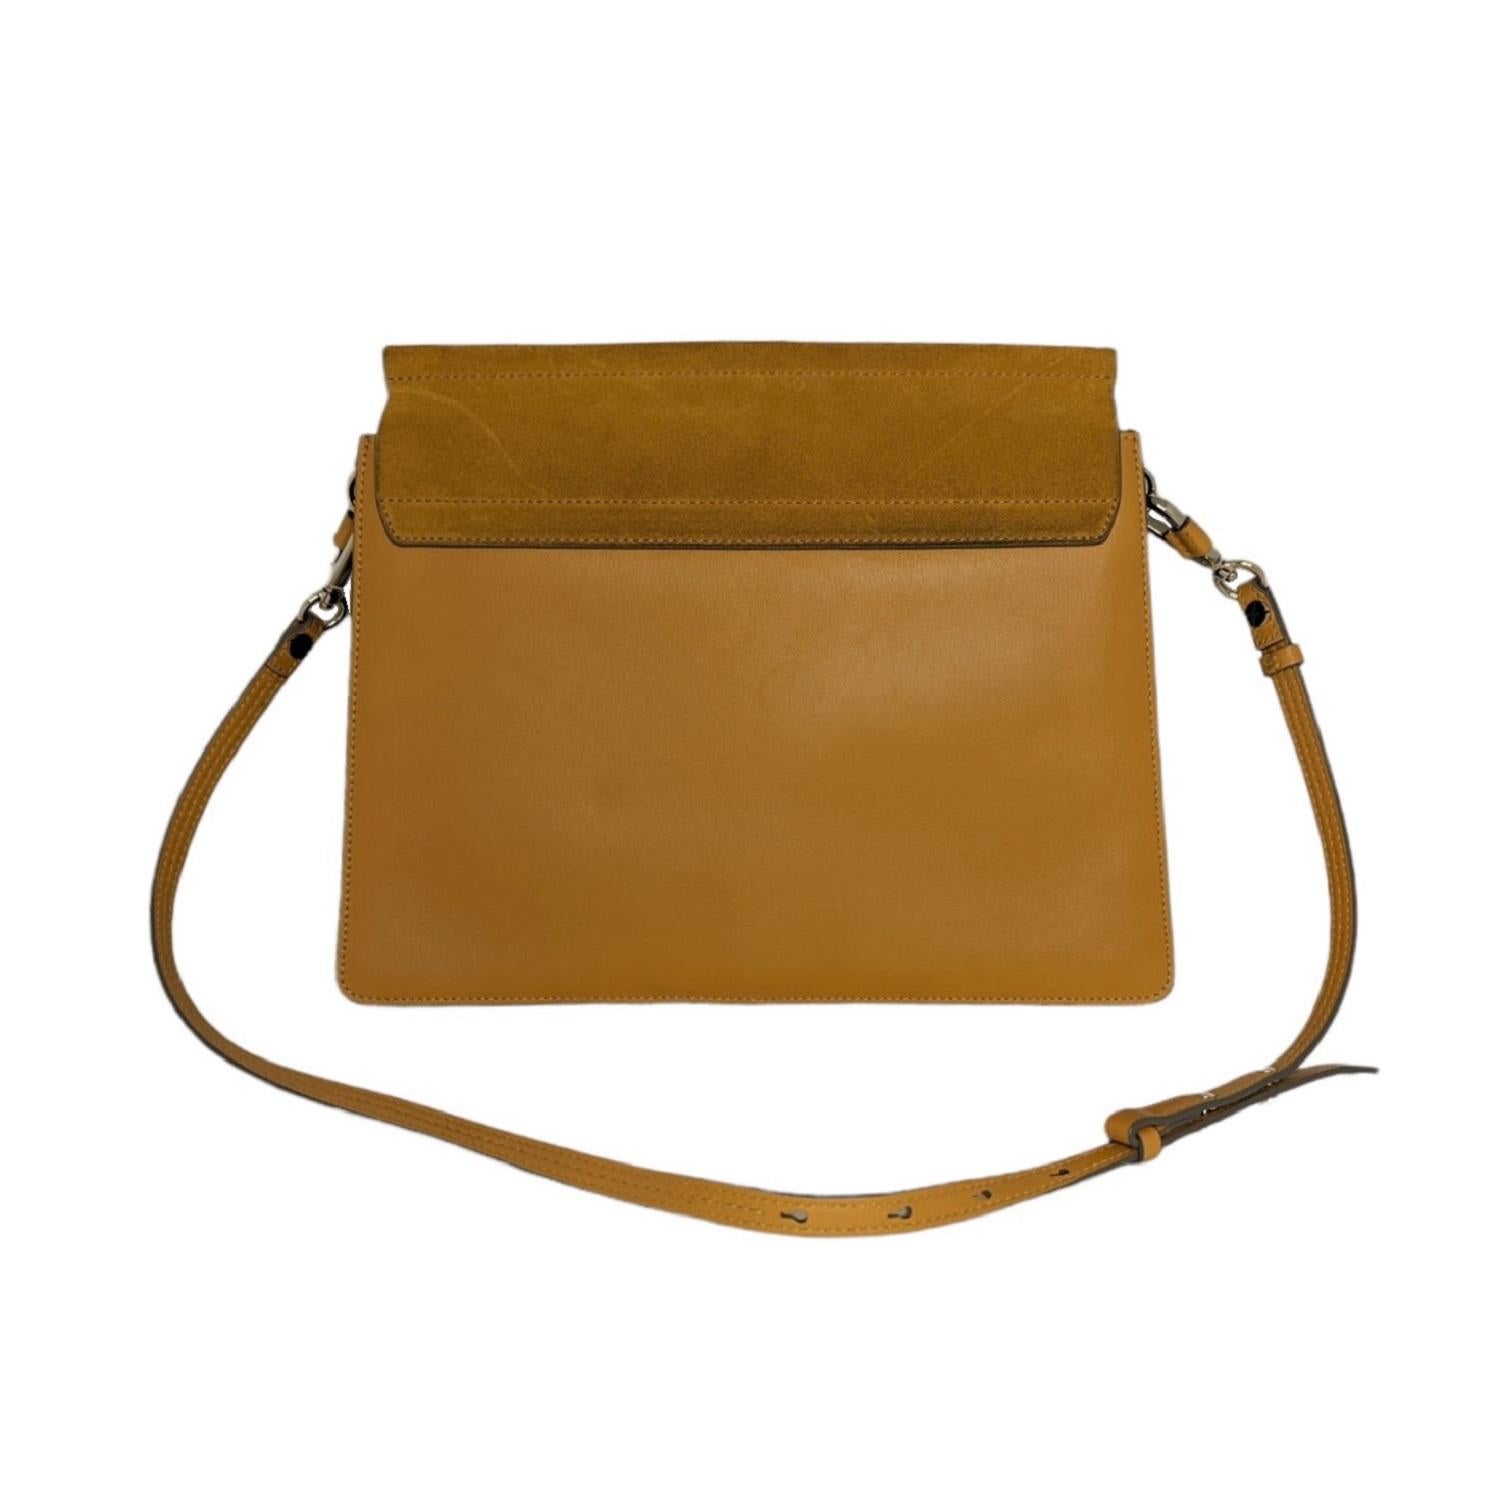 The clean, contemporary aesthetic of the Faye shoulder bag makes it an effortlessly elegant accessory with laid-back appeal. The flawless combination of smooth and suede calfskin adds textural depth, punctuated with cool hardware for subtle 70s